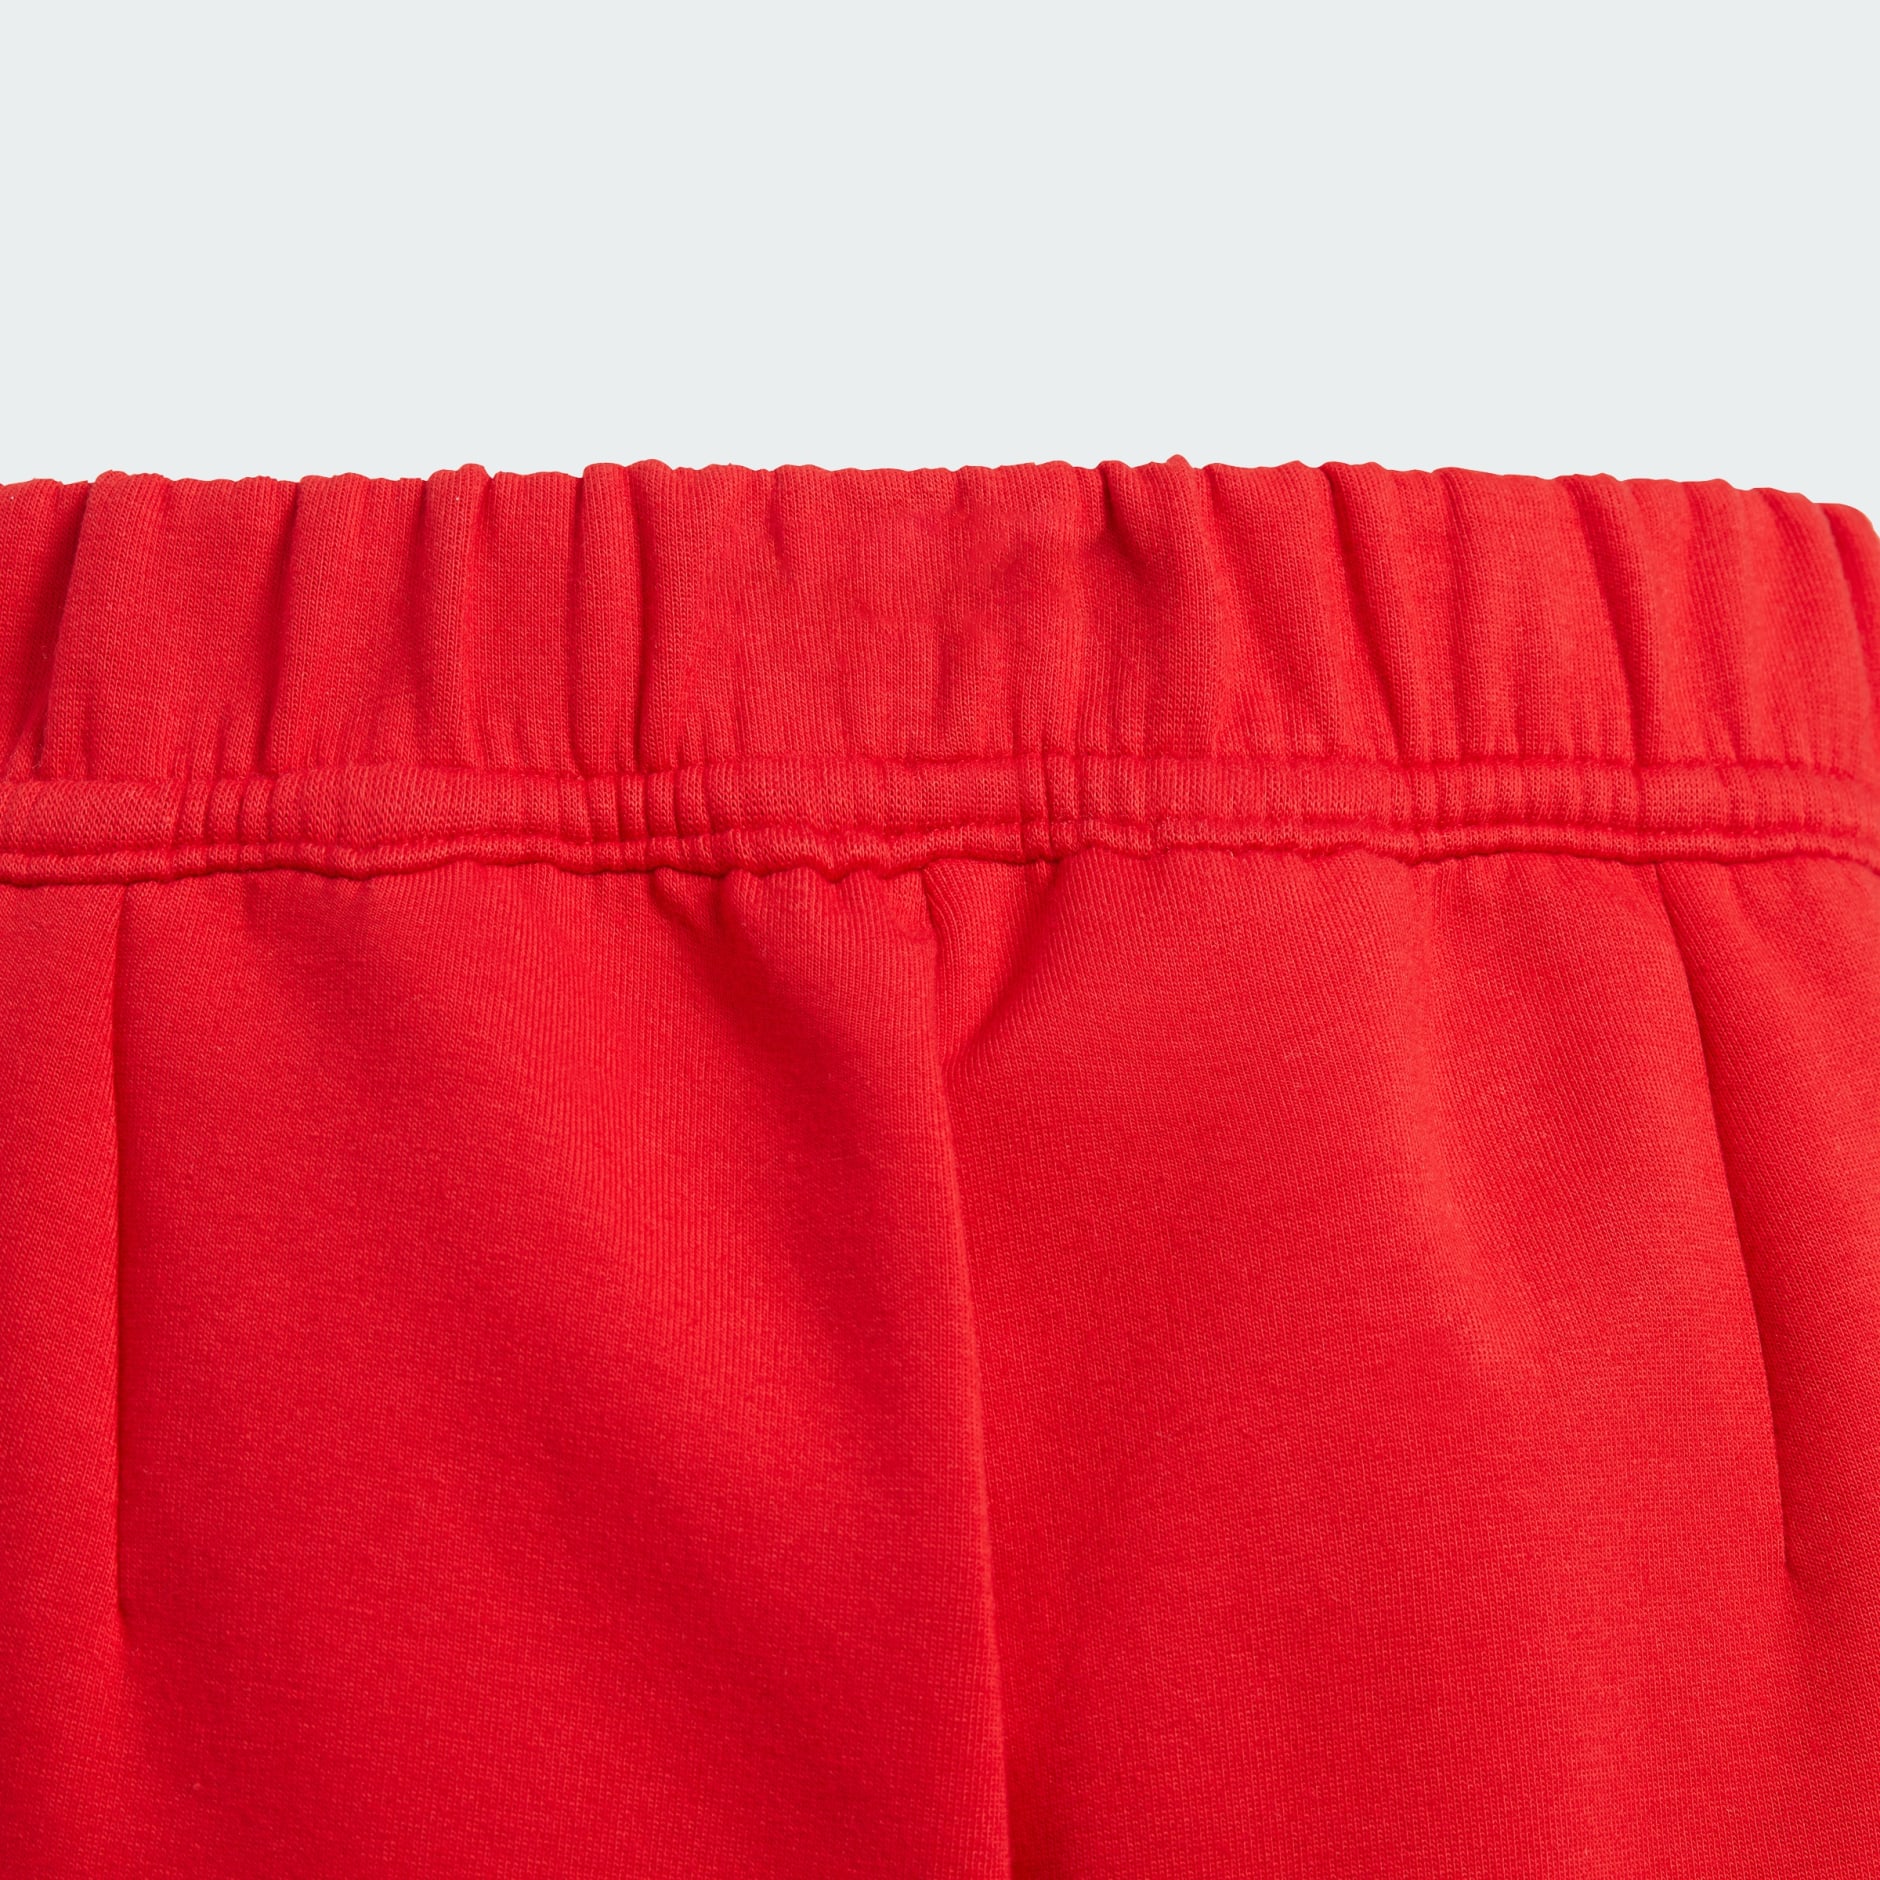 Clothing - adidas Z.N.E. Pants Kids - Red | adidas South Africa